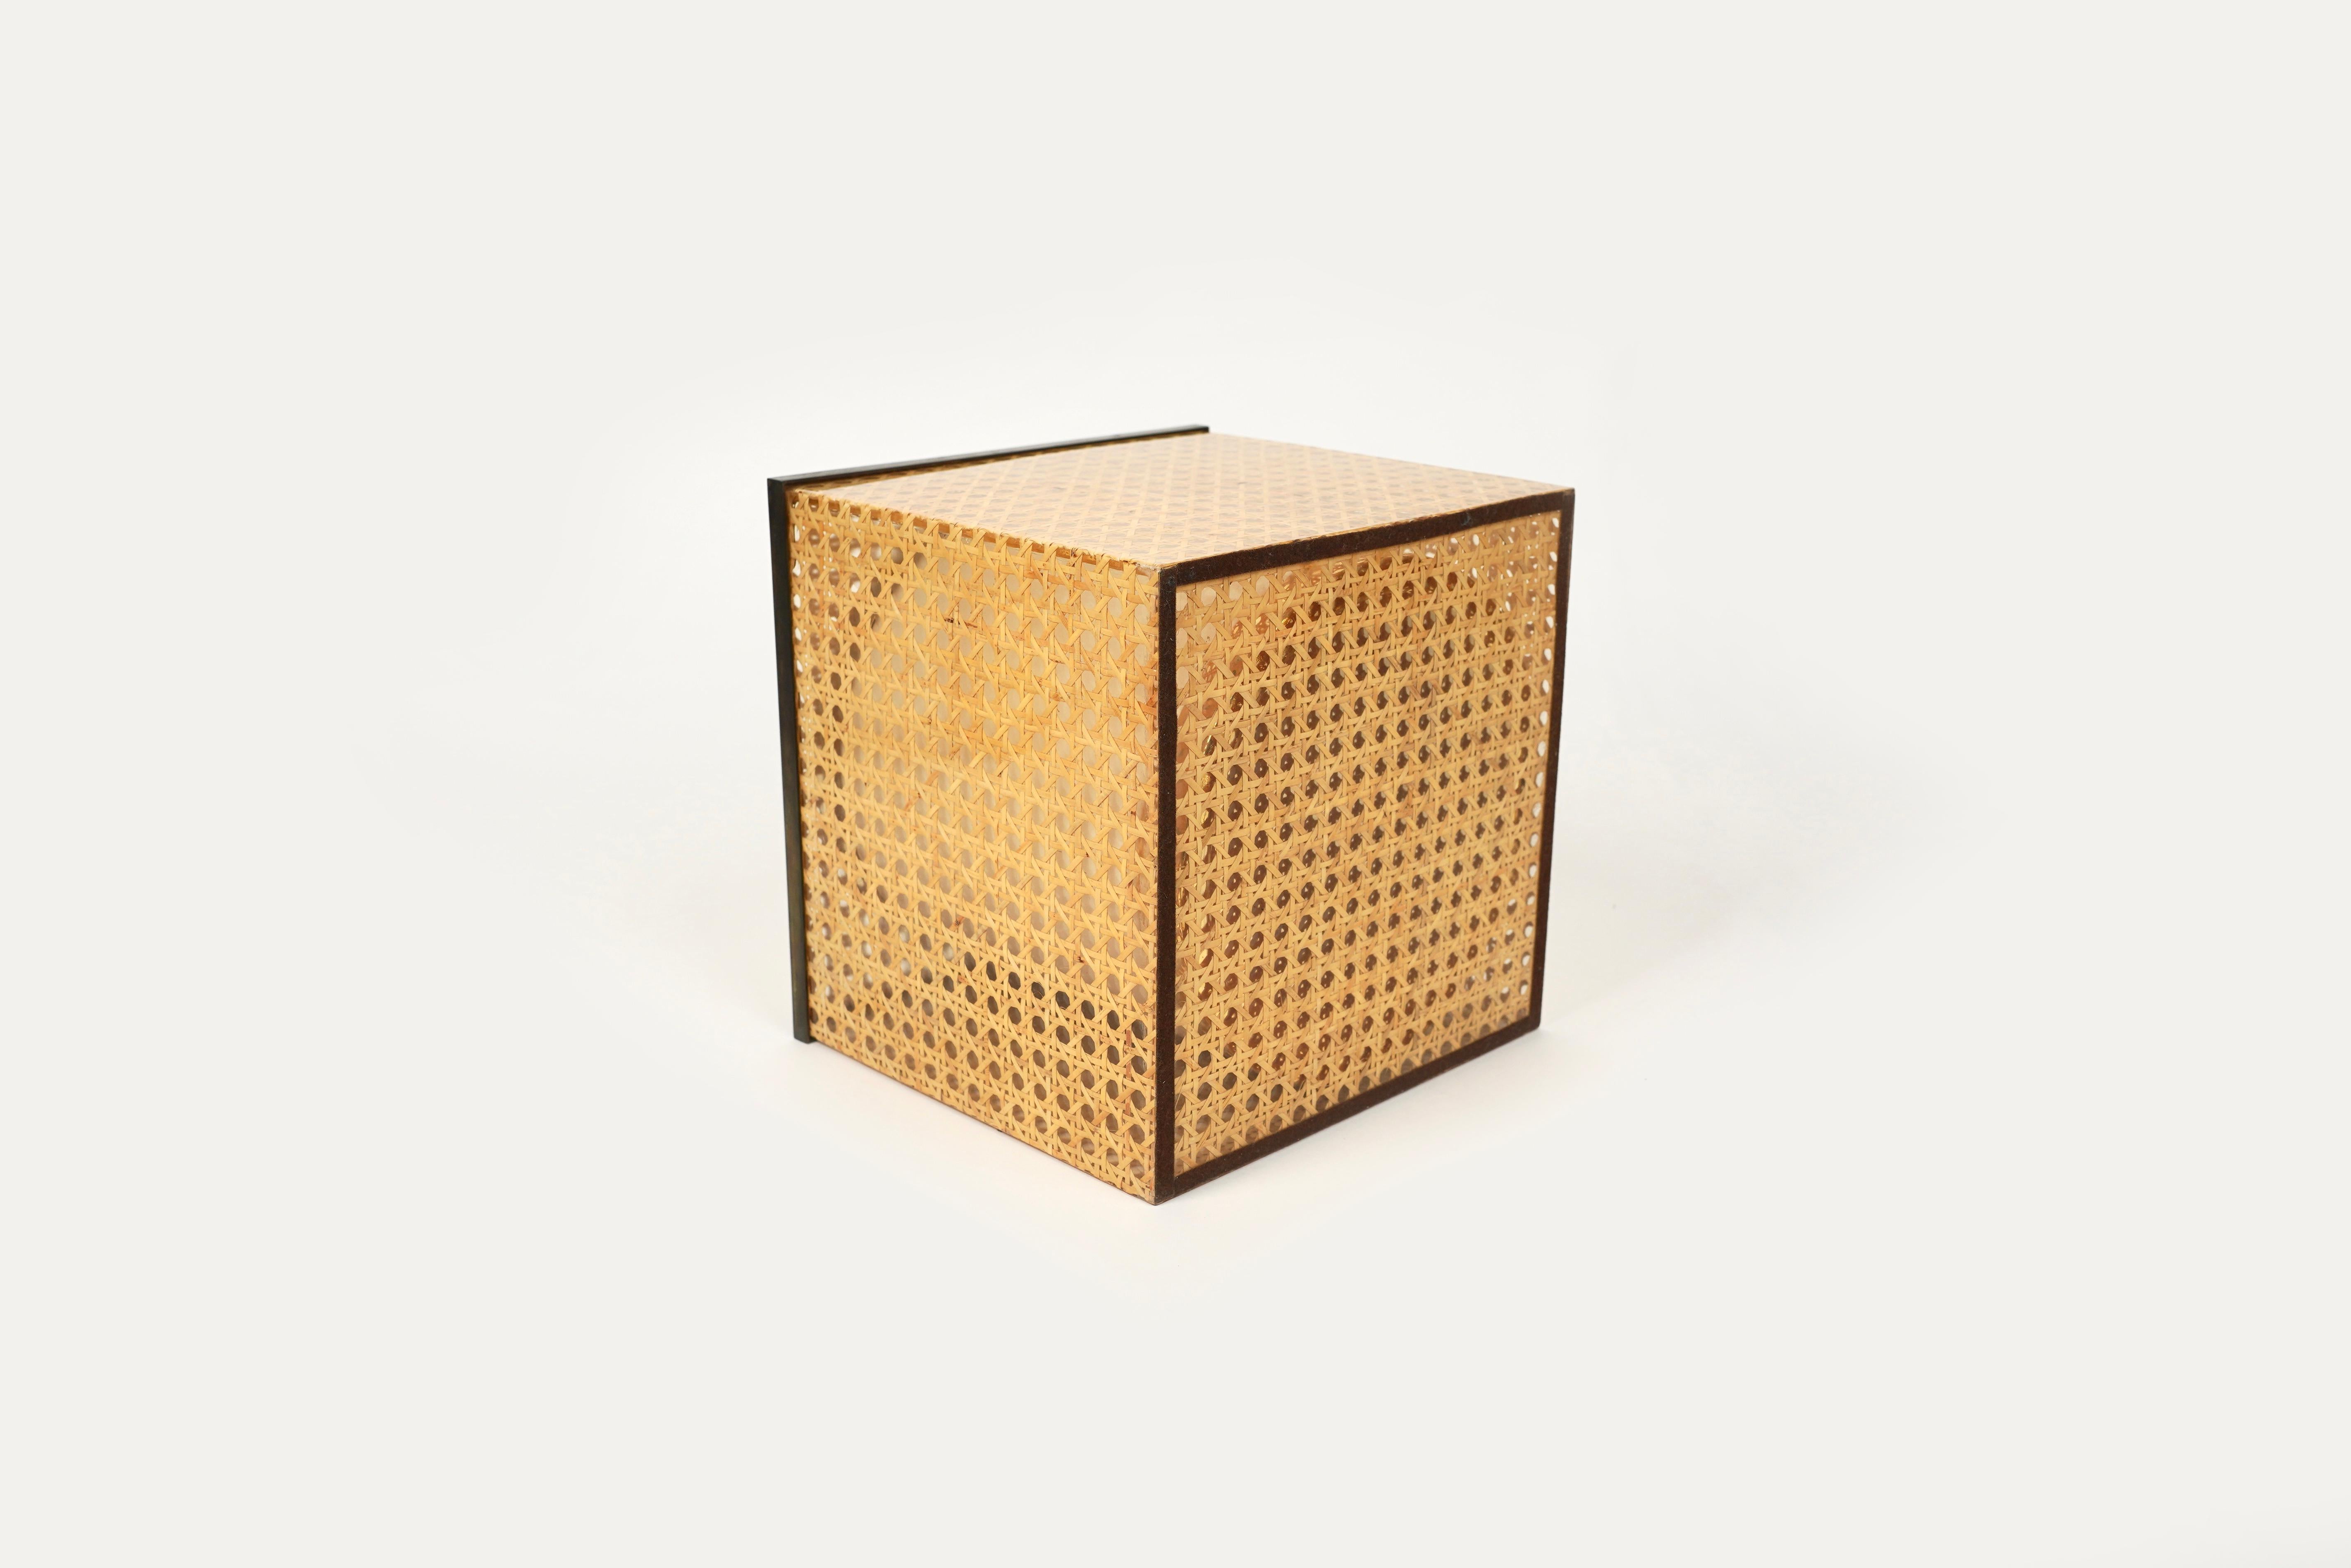 Cube Ice Bucket in Lucite, Rattan and Brass Christian Dior Style, Italy, 1970s For Sale 4